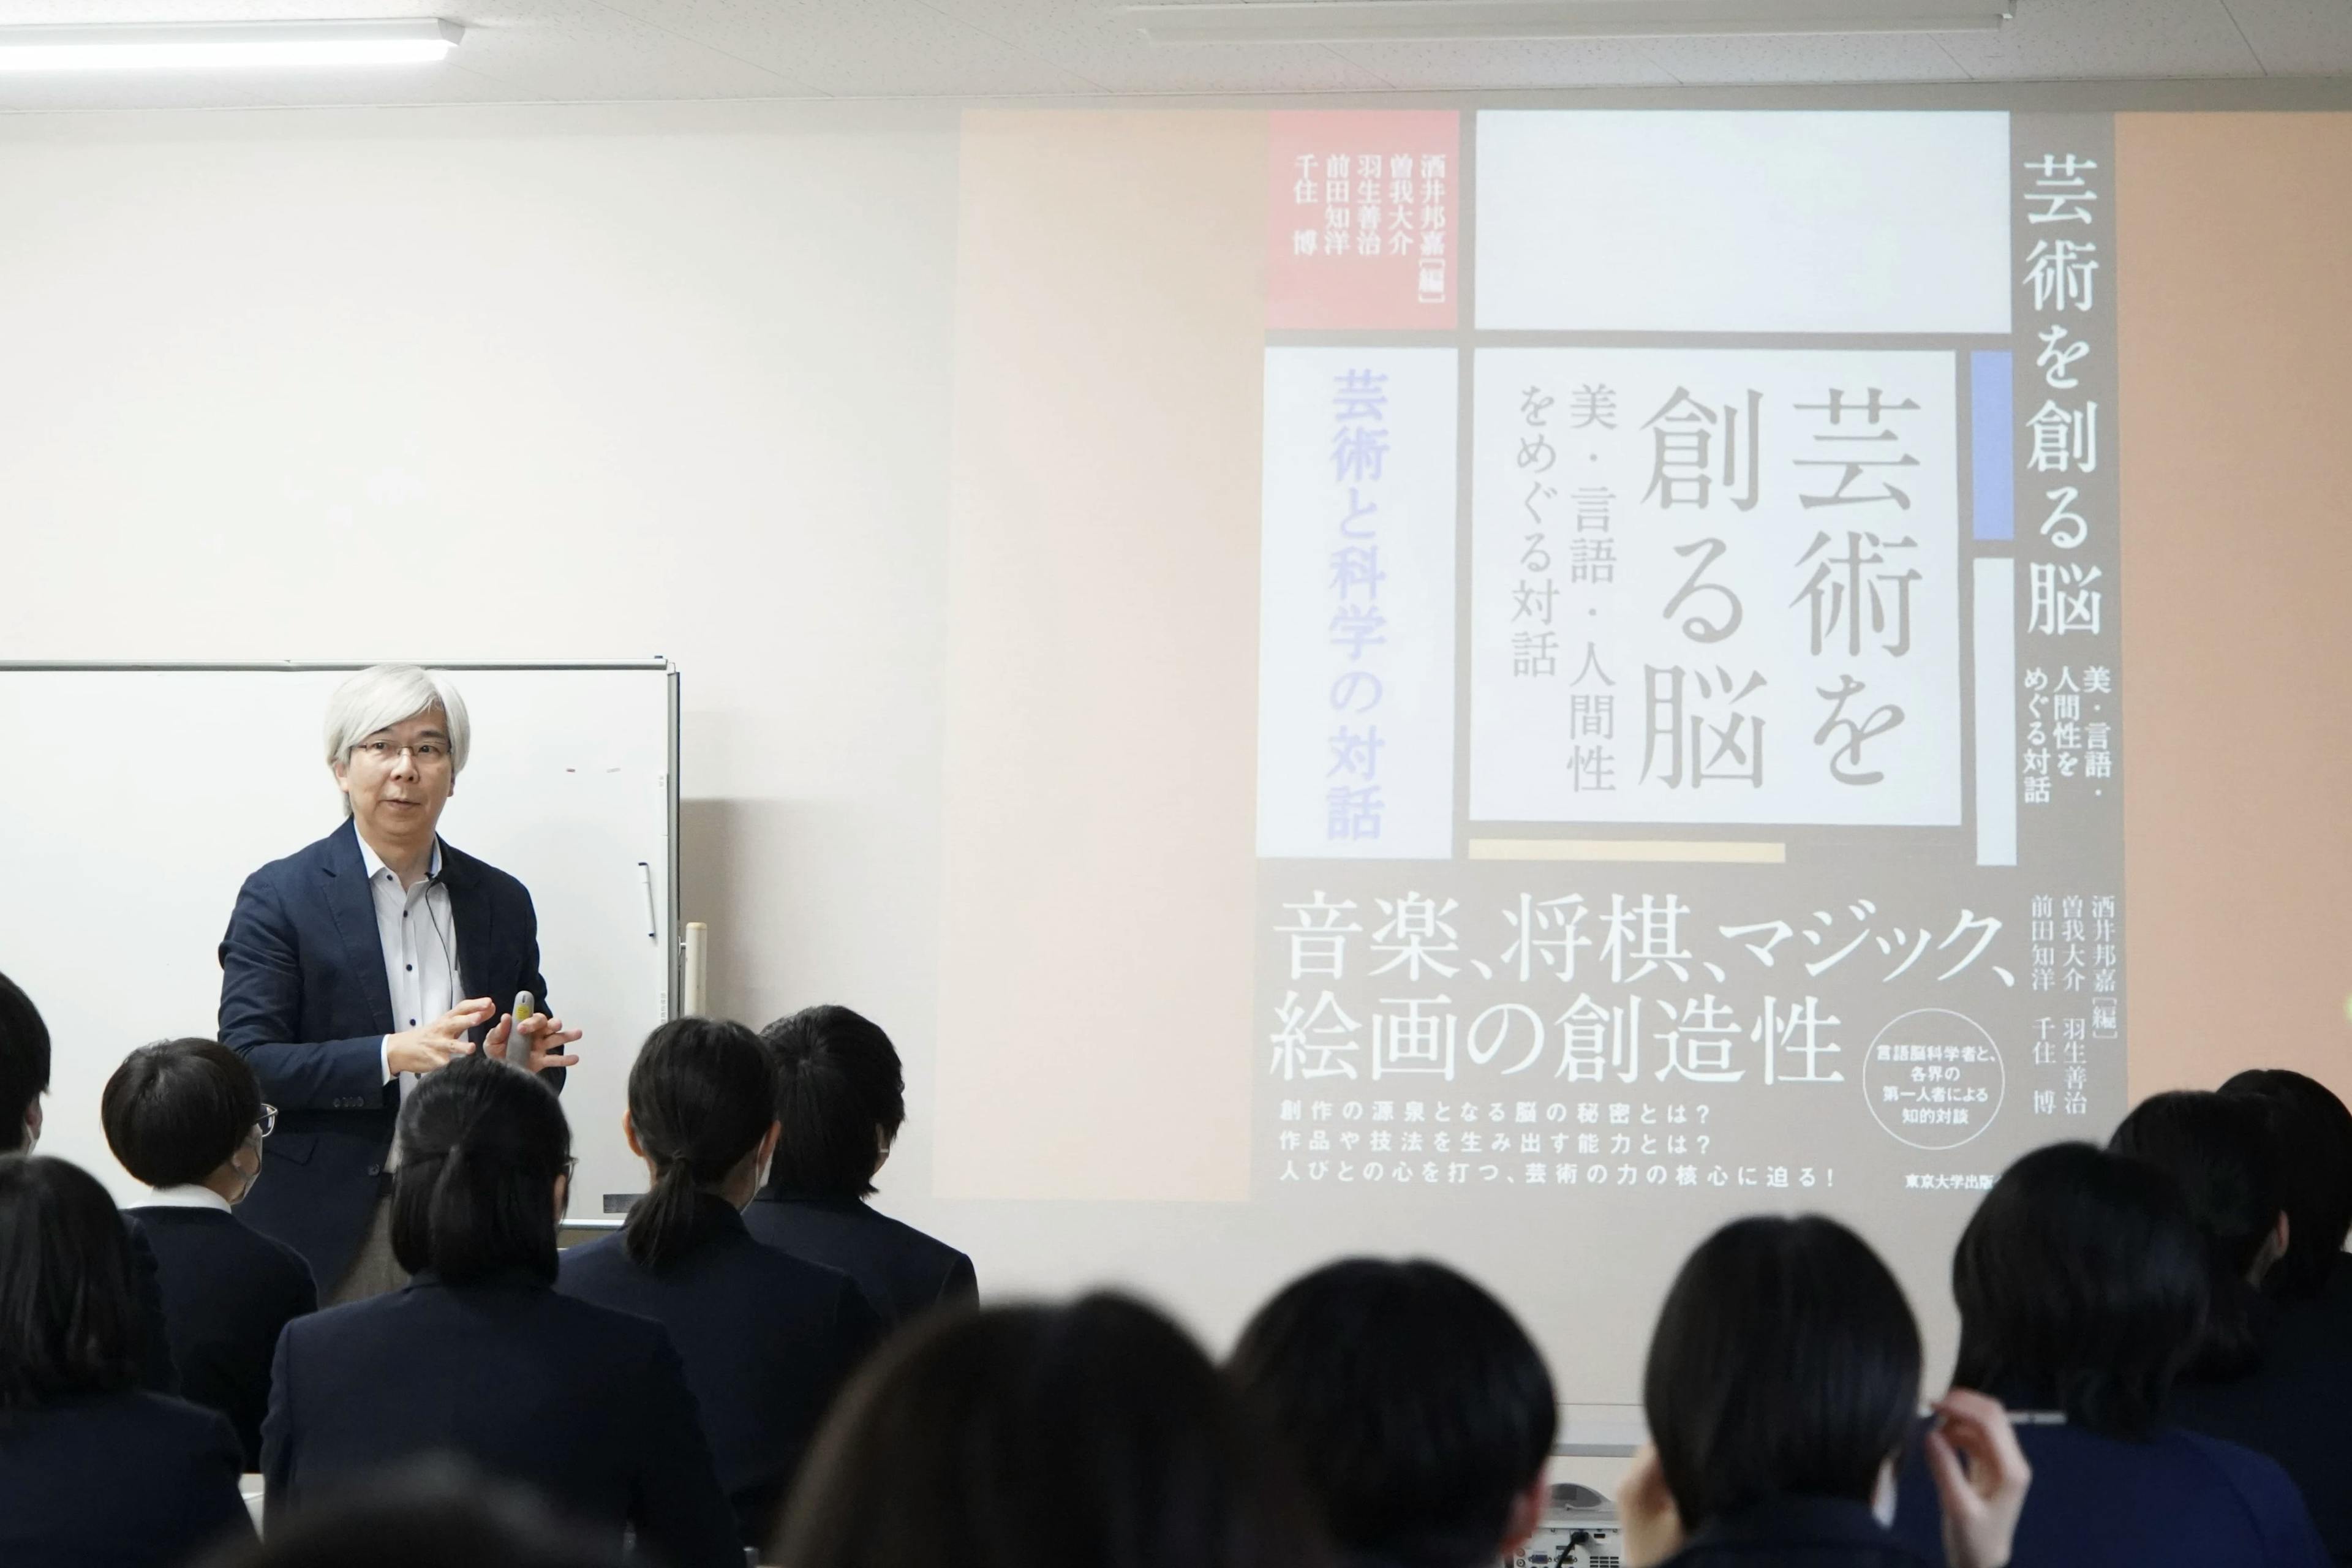 Professor Kuniyoshi Sakai of the University of Tokyo gives a special lecture at the Manga Department of Takamori High School